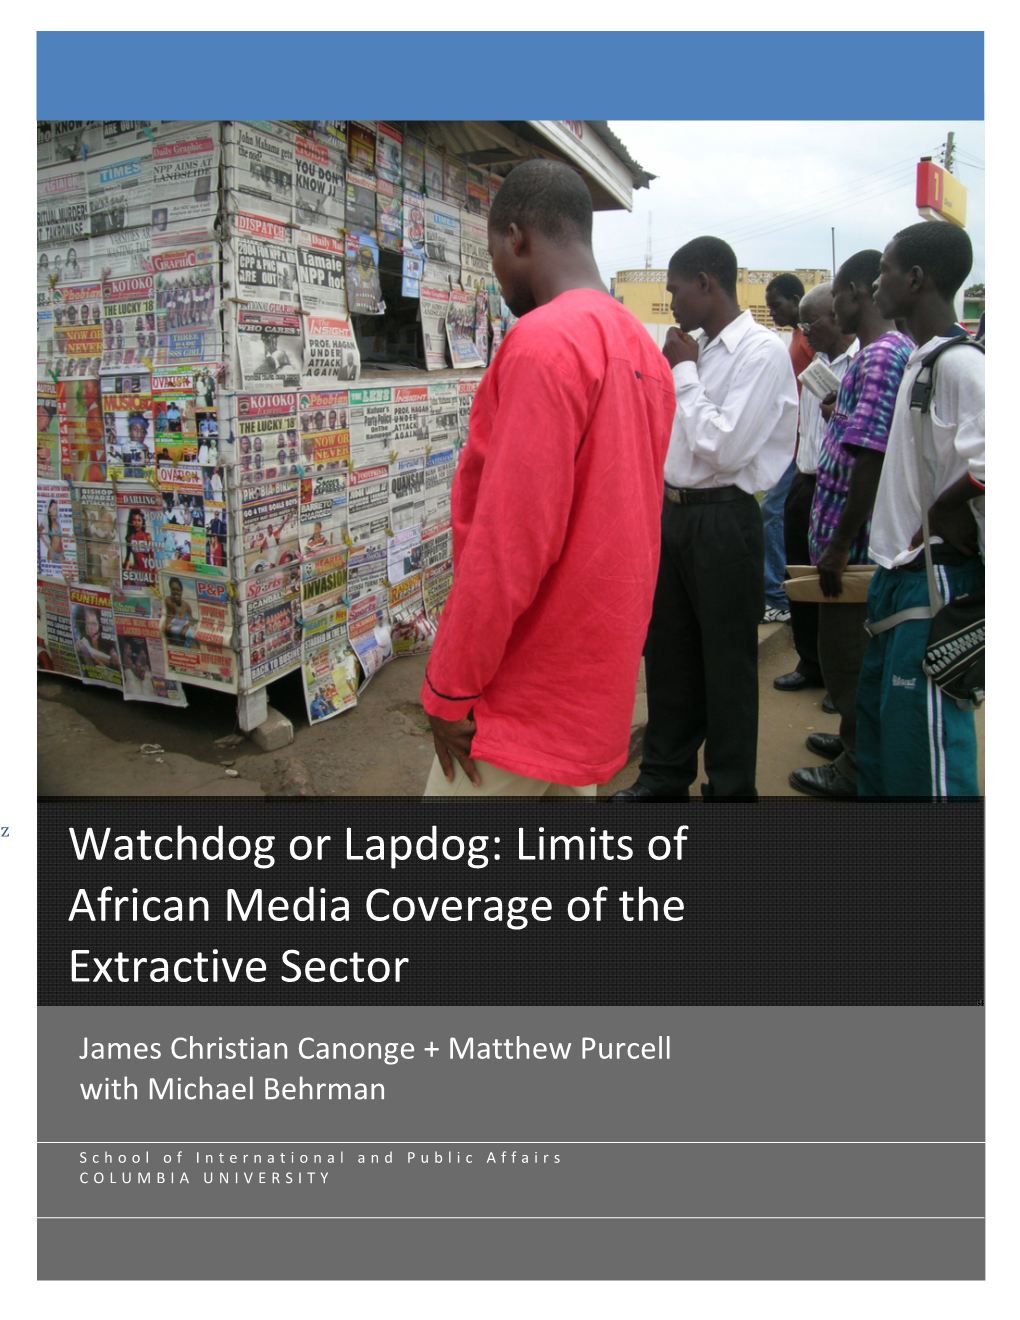 Watchdog Or Lapdog: Limits of African Media Coverage of the Extractive Sector